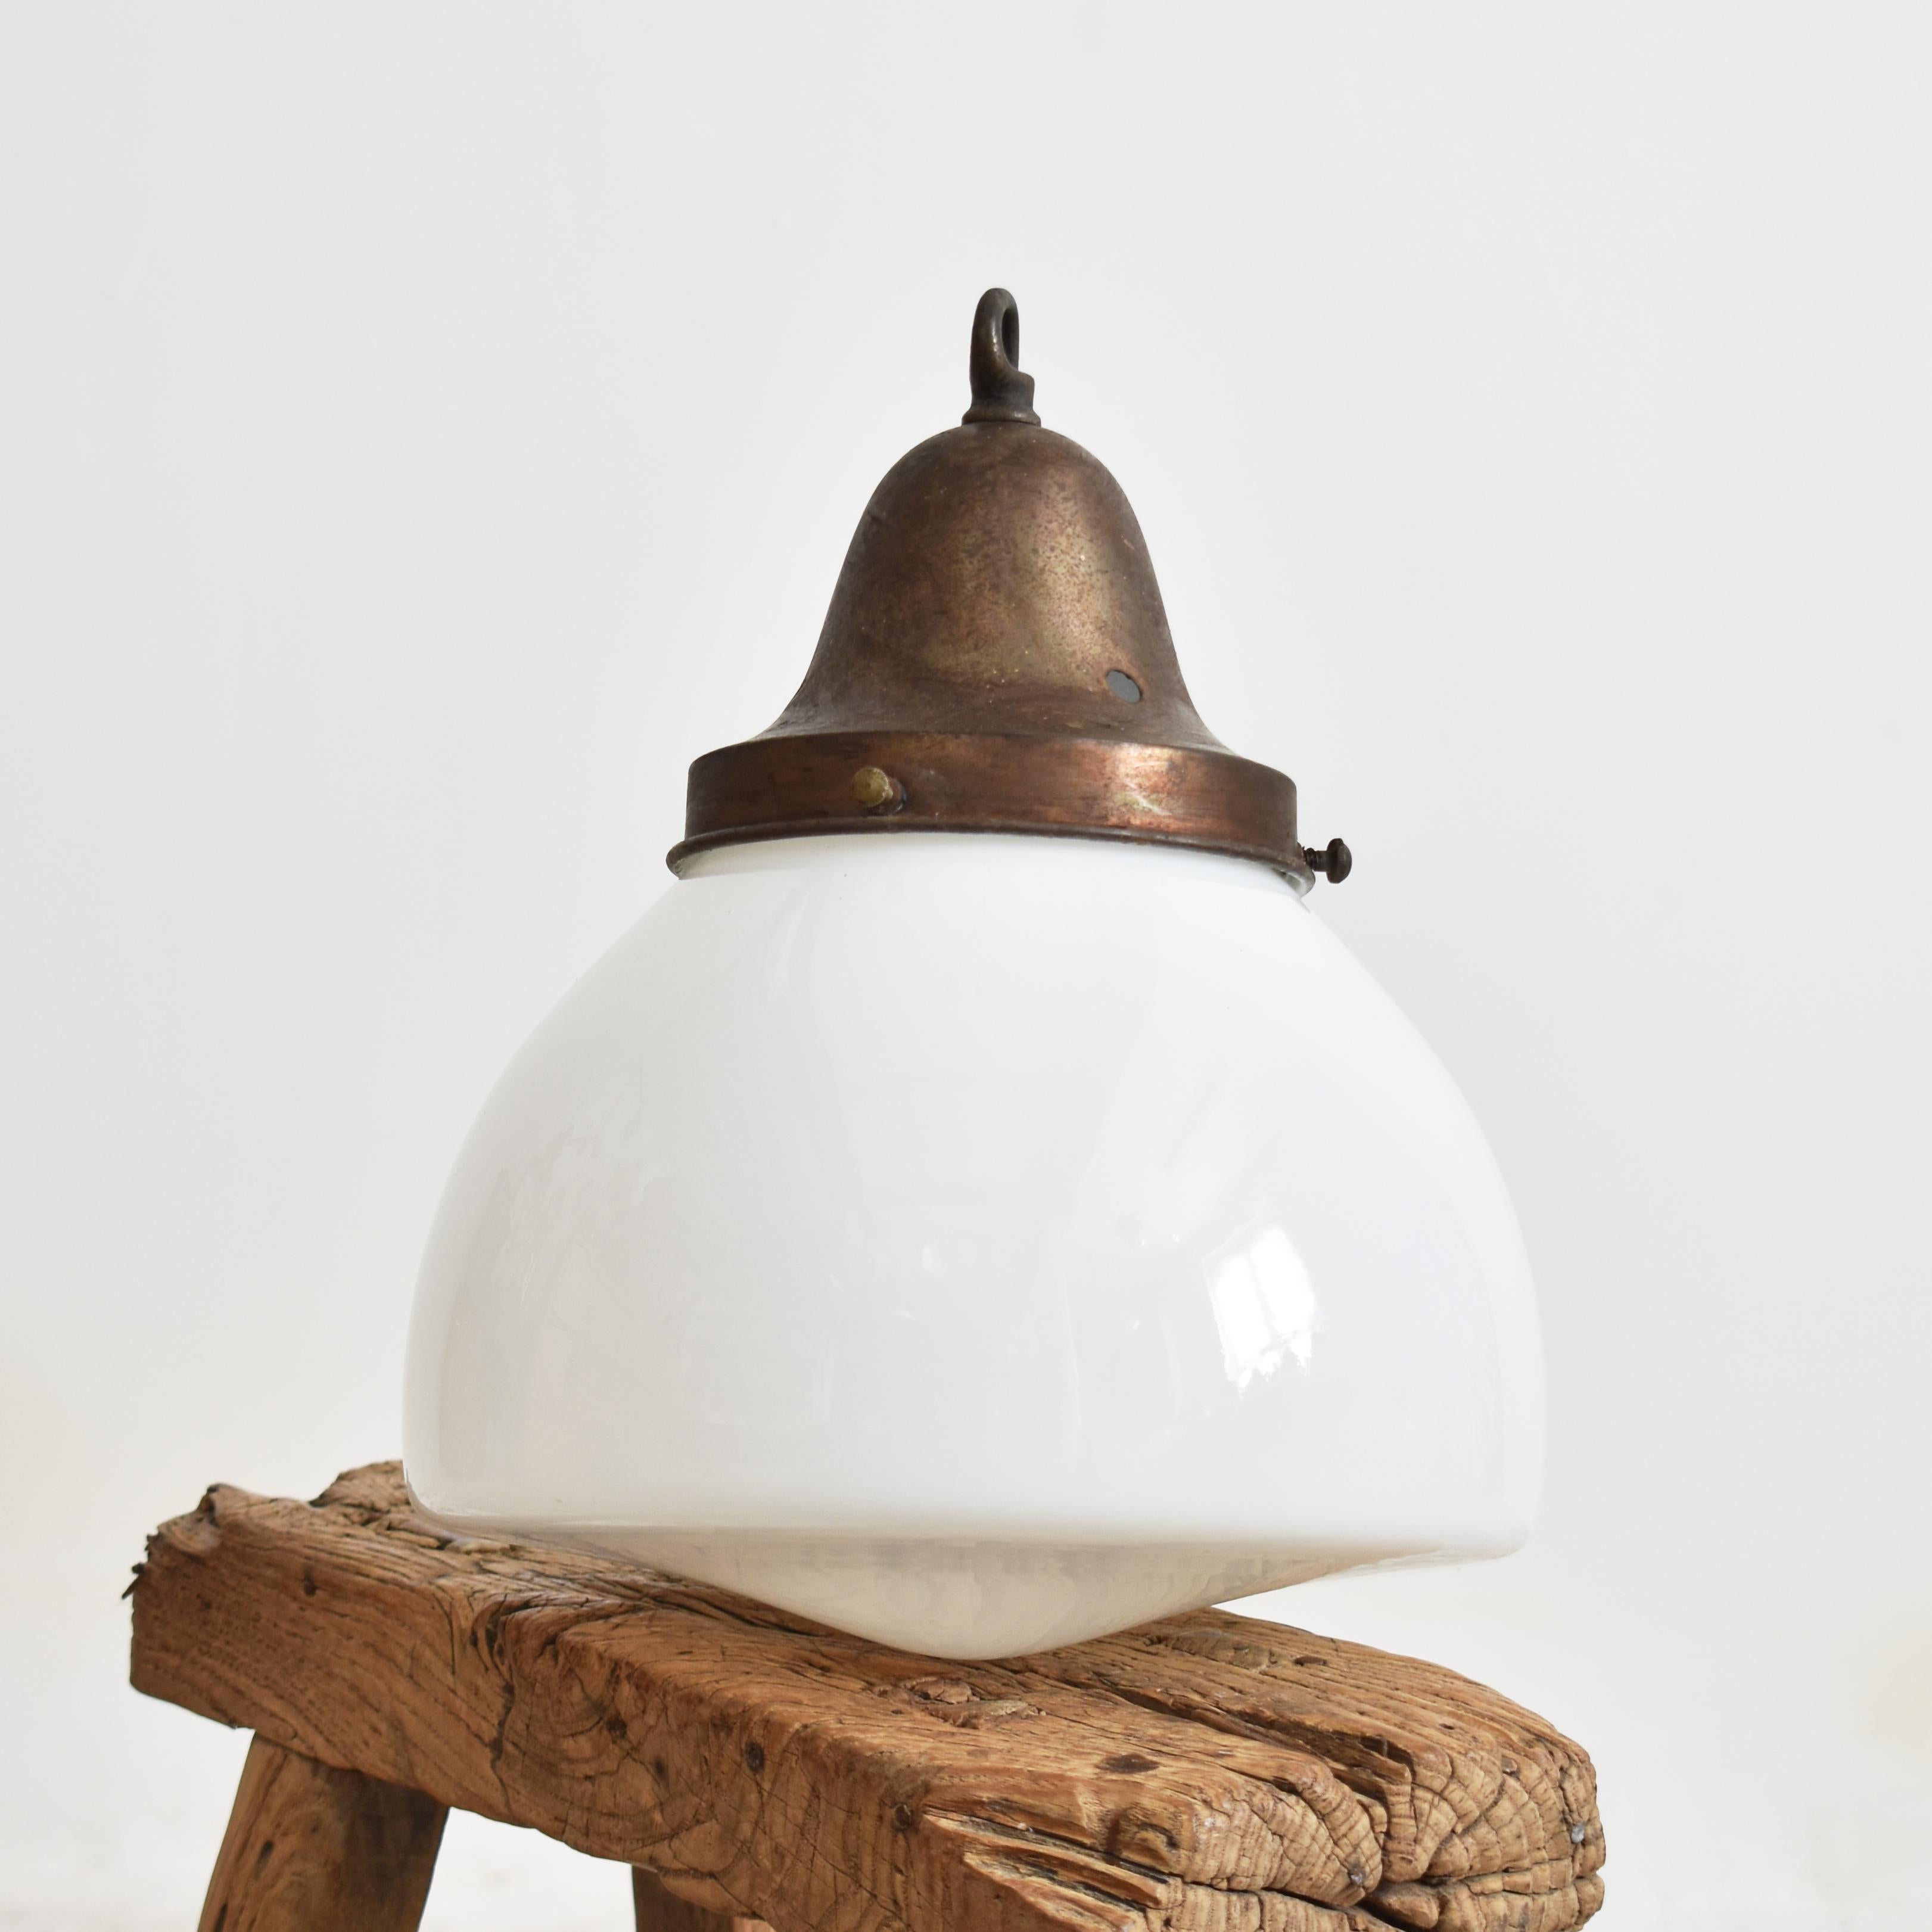 Antique Church Opaline Pendant Light – AA

An original opaline glass pendant light. The light has a milk glass opaline shade and original brass hanging gallery. The gallery finish has been left untouched in it original